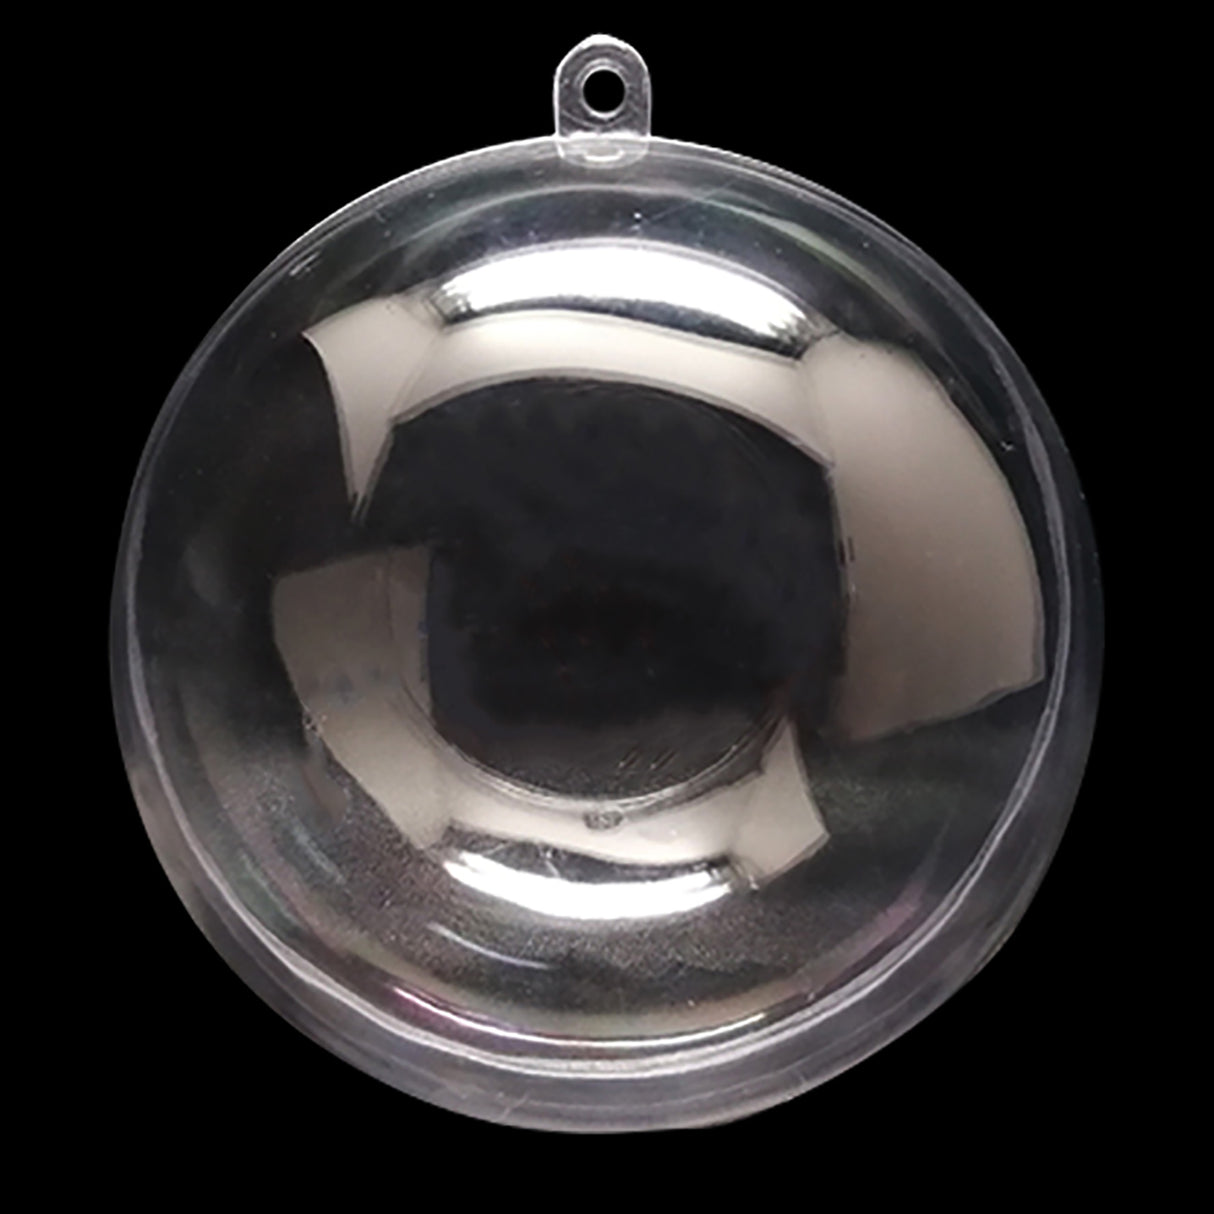 Set of 3 Clear Plastic Ball Ornaments 3.45 Inches (88 mm)